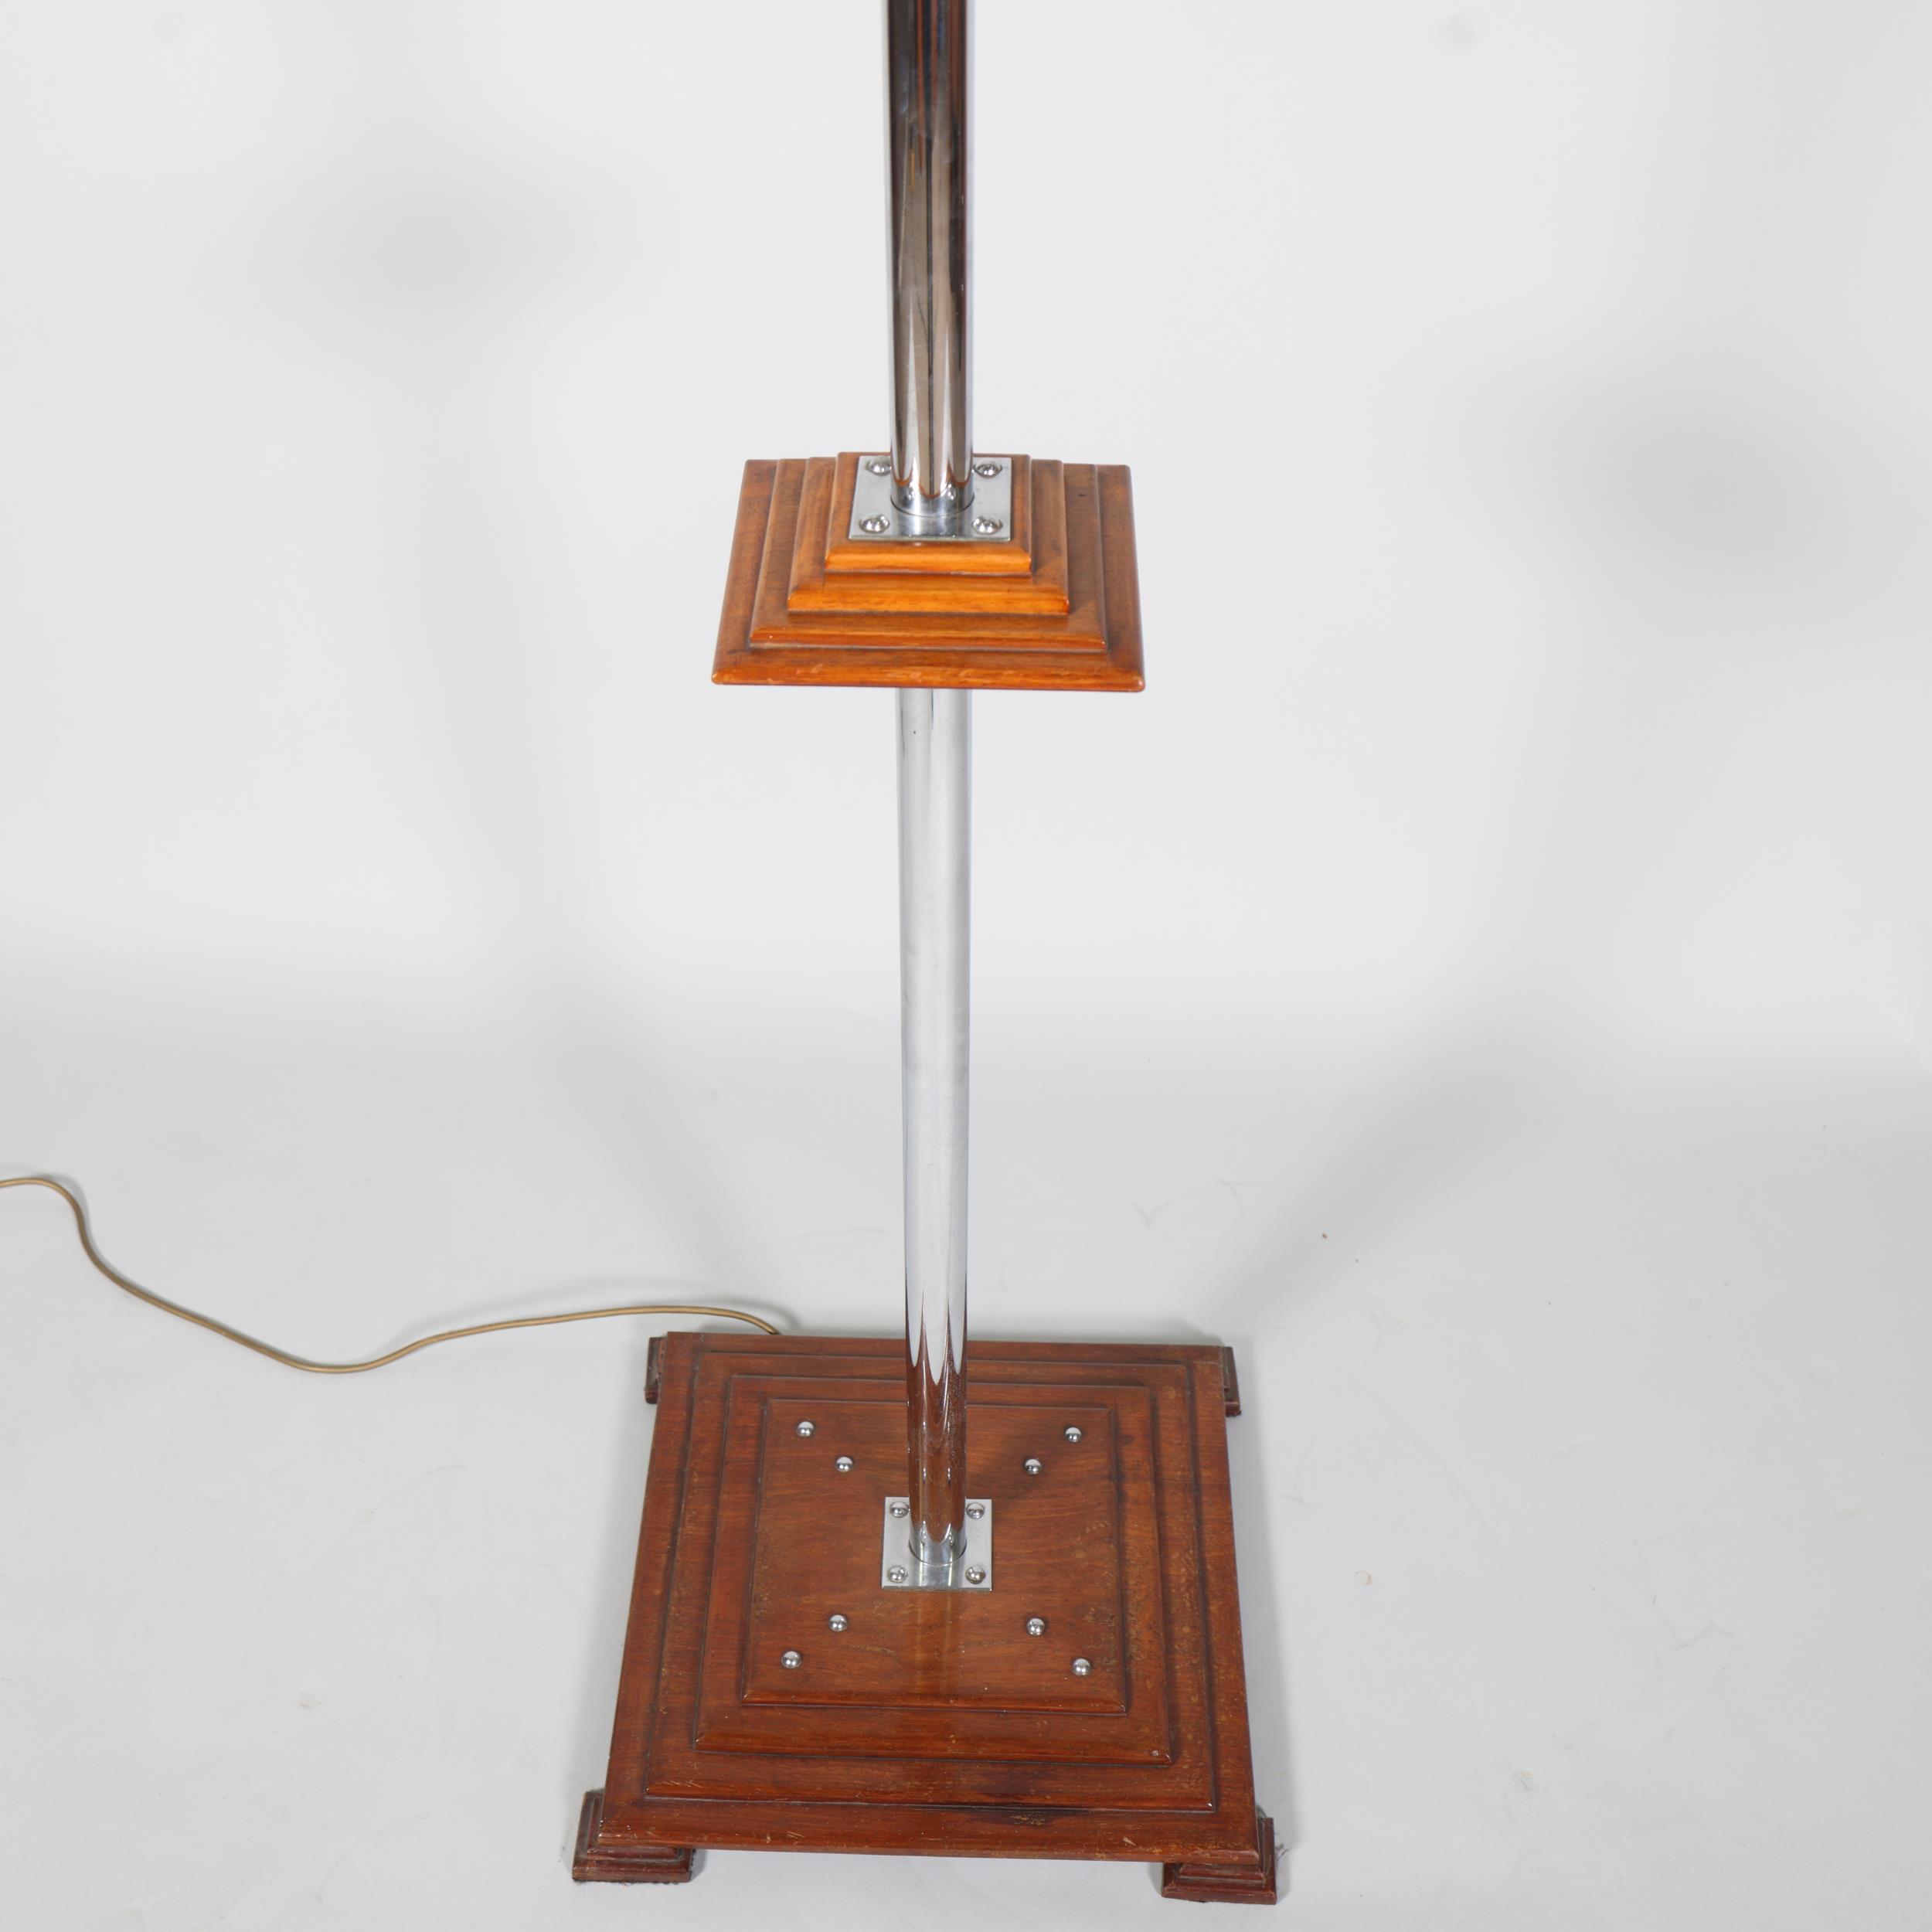 Art Deco chrome and stained wood standard lamp, circa 1920s, modern shade, overall height 168cm - Image 2 of 4